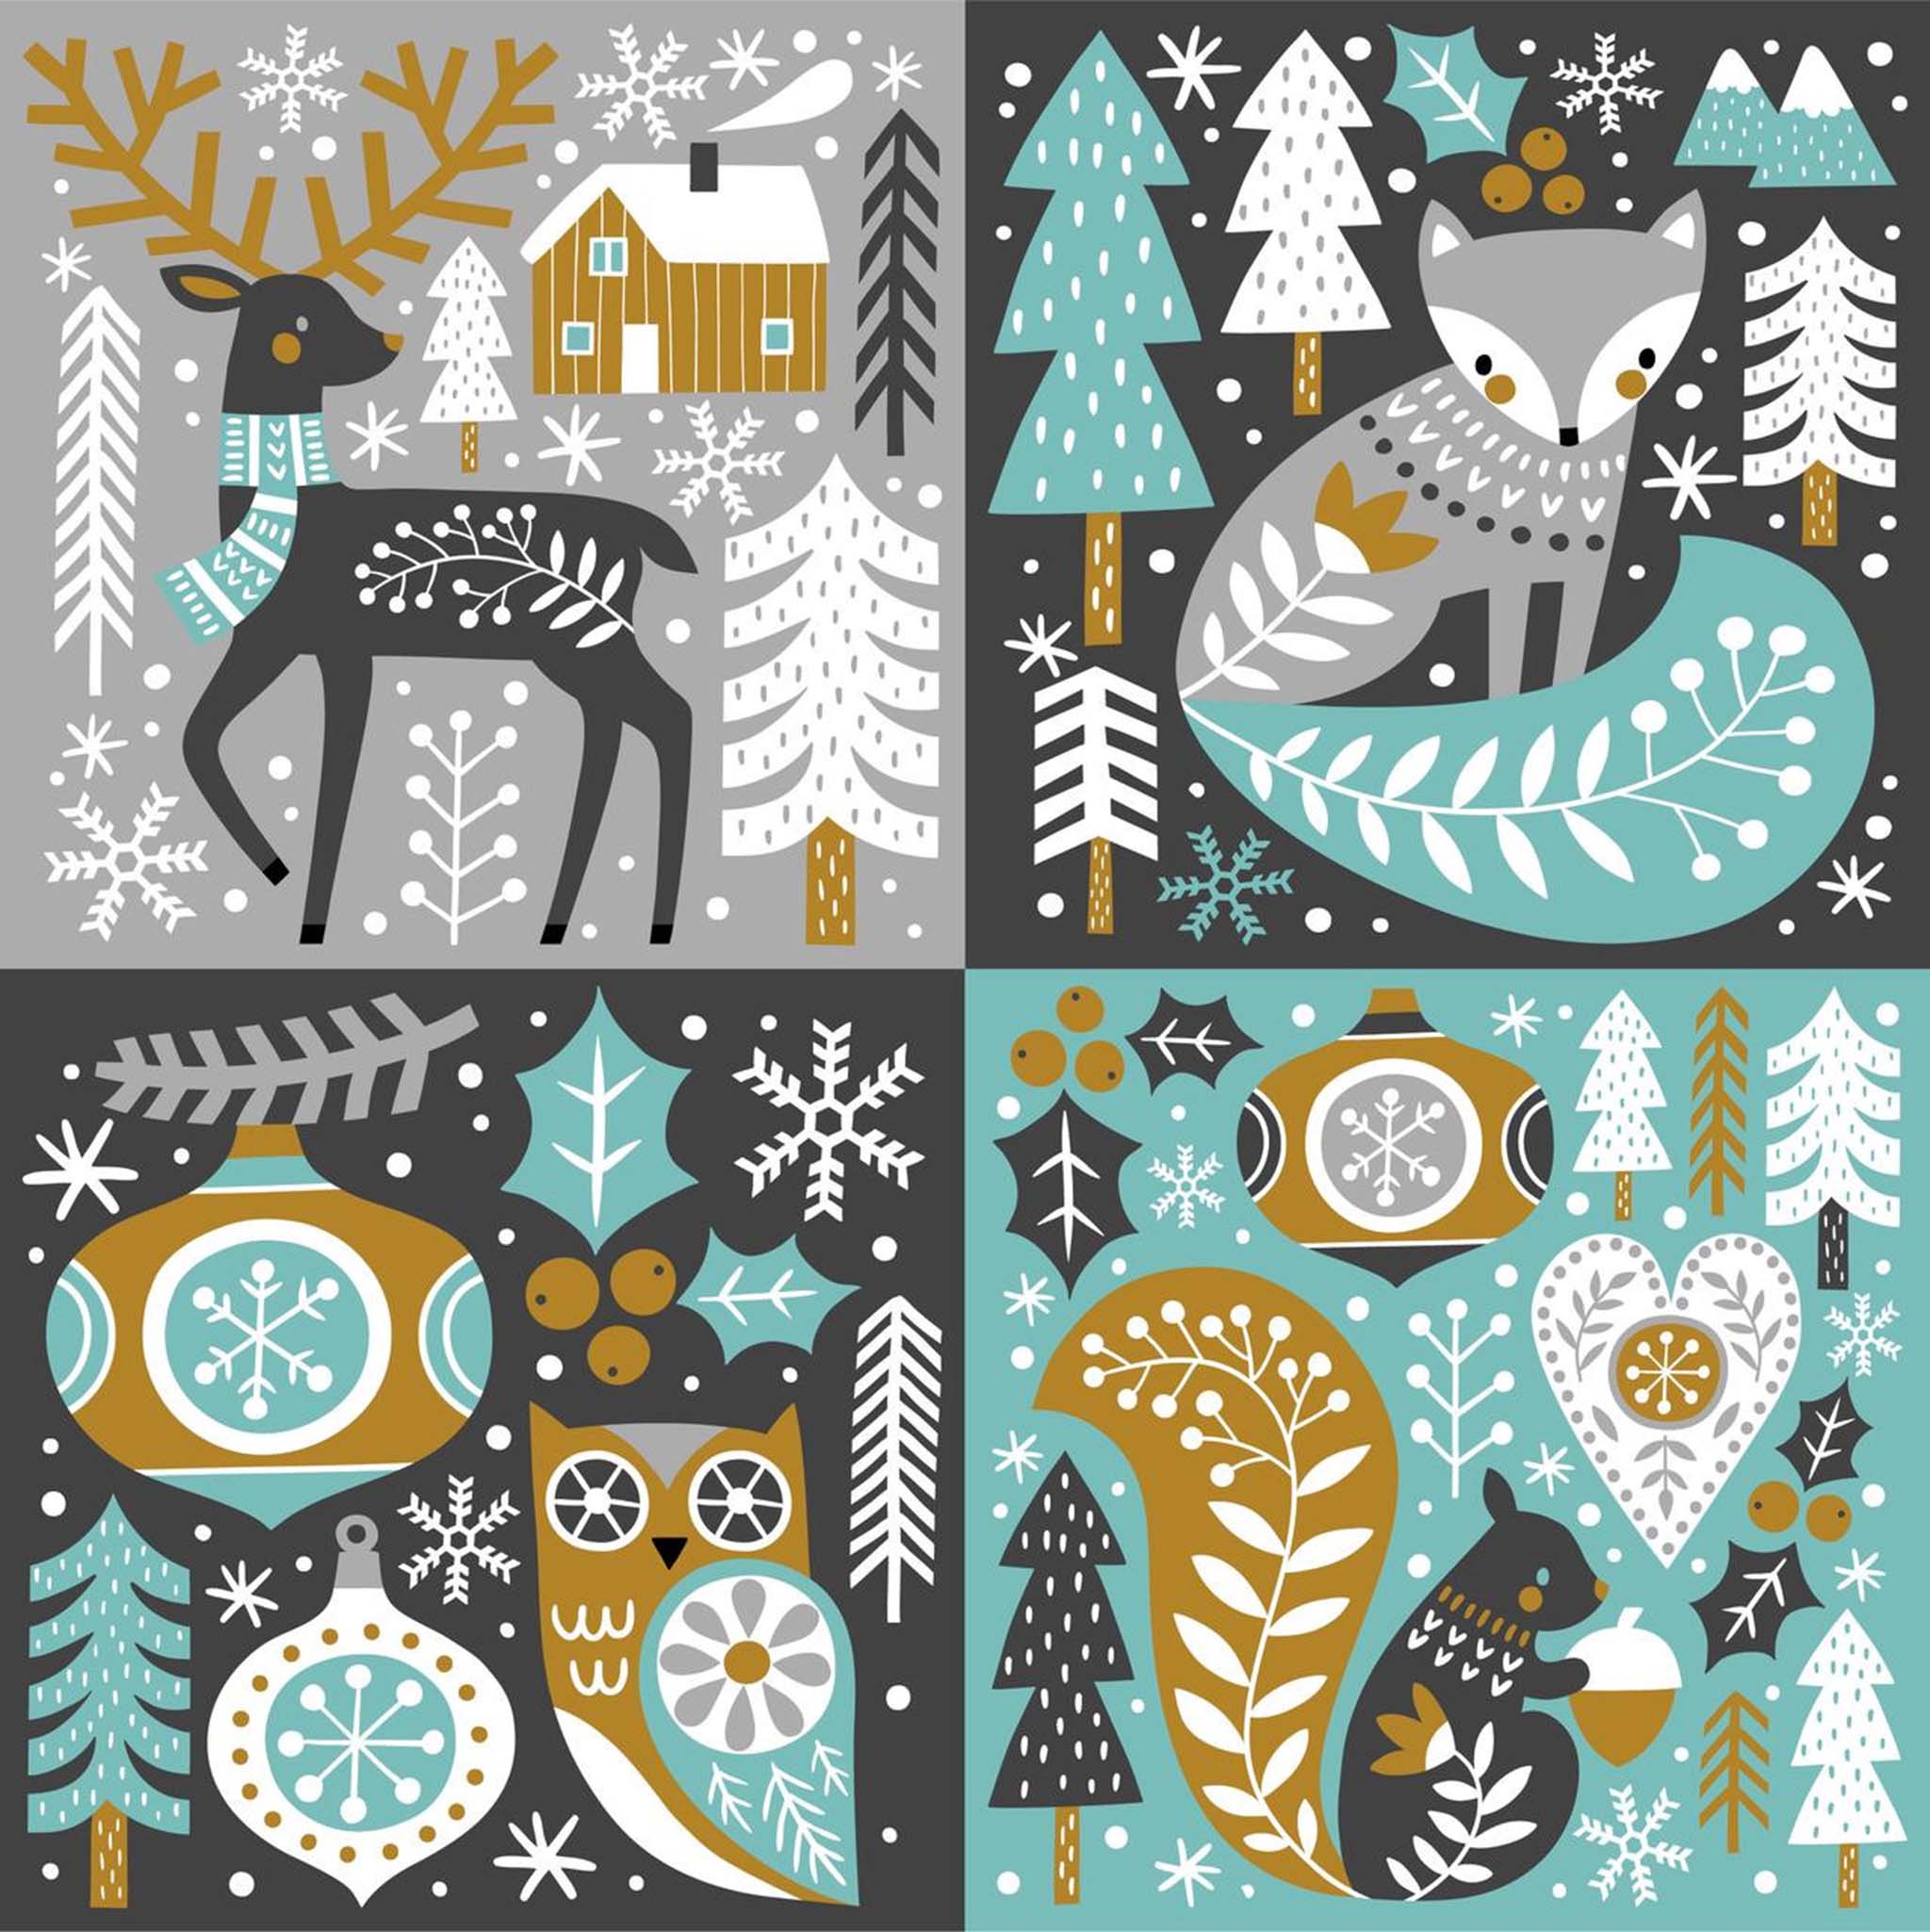 Rice paper that features whimsical winter-themed designs of charming images including an owl, deer, fox, and squirrel in charcoal, teal, and gold colors.